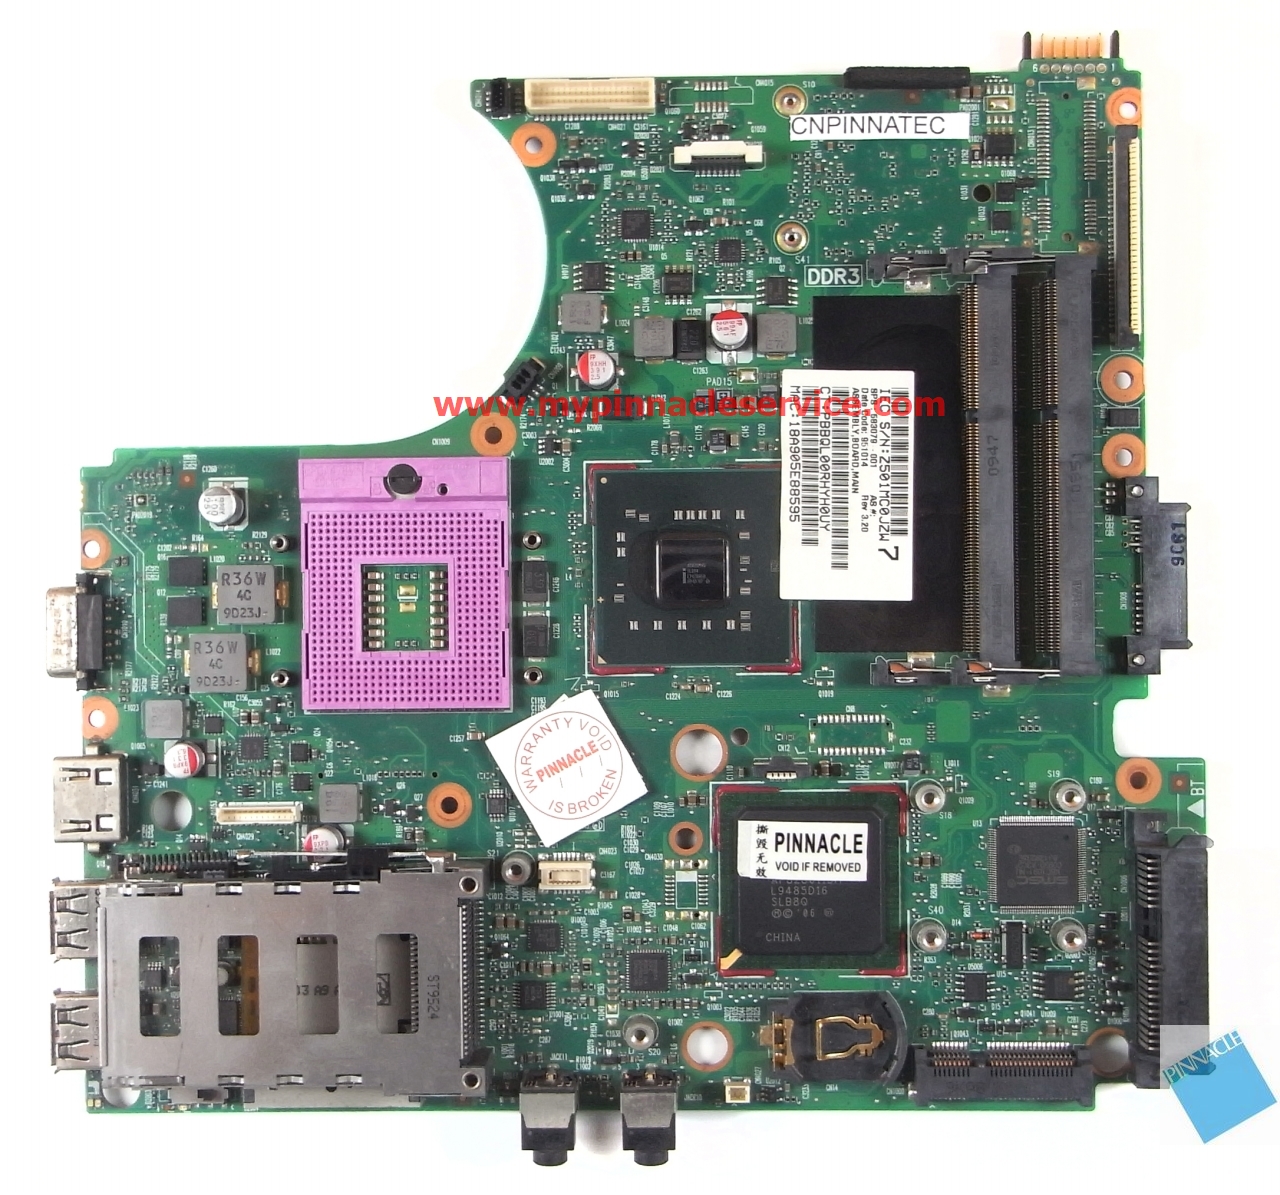 motherboard-for-hp-probook-4410s-4510s-583079-001-6050a2297401-use-ddr3-ram-r0012573.jpg